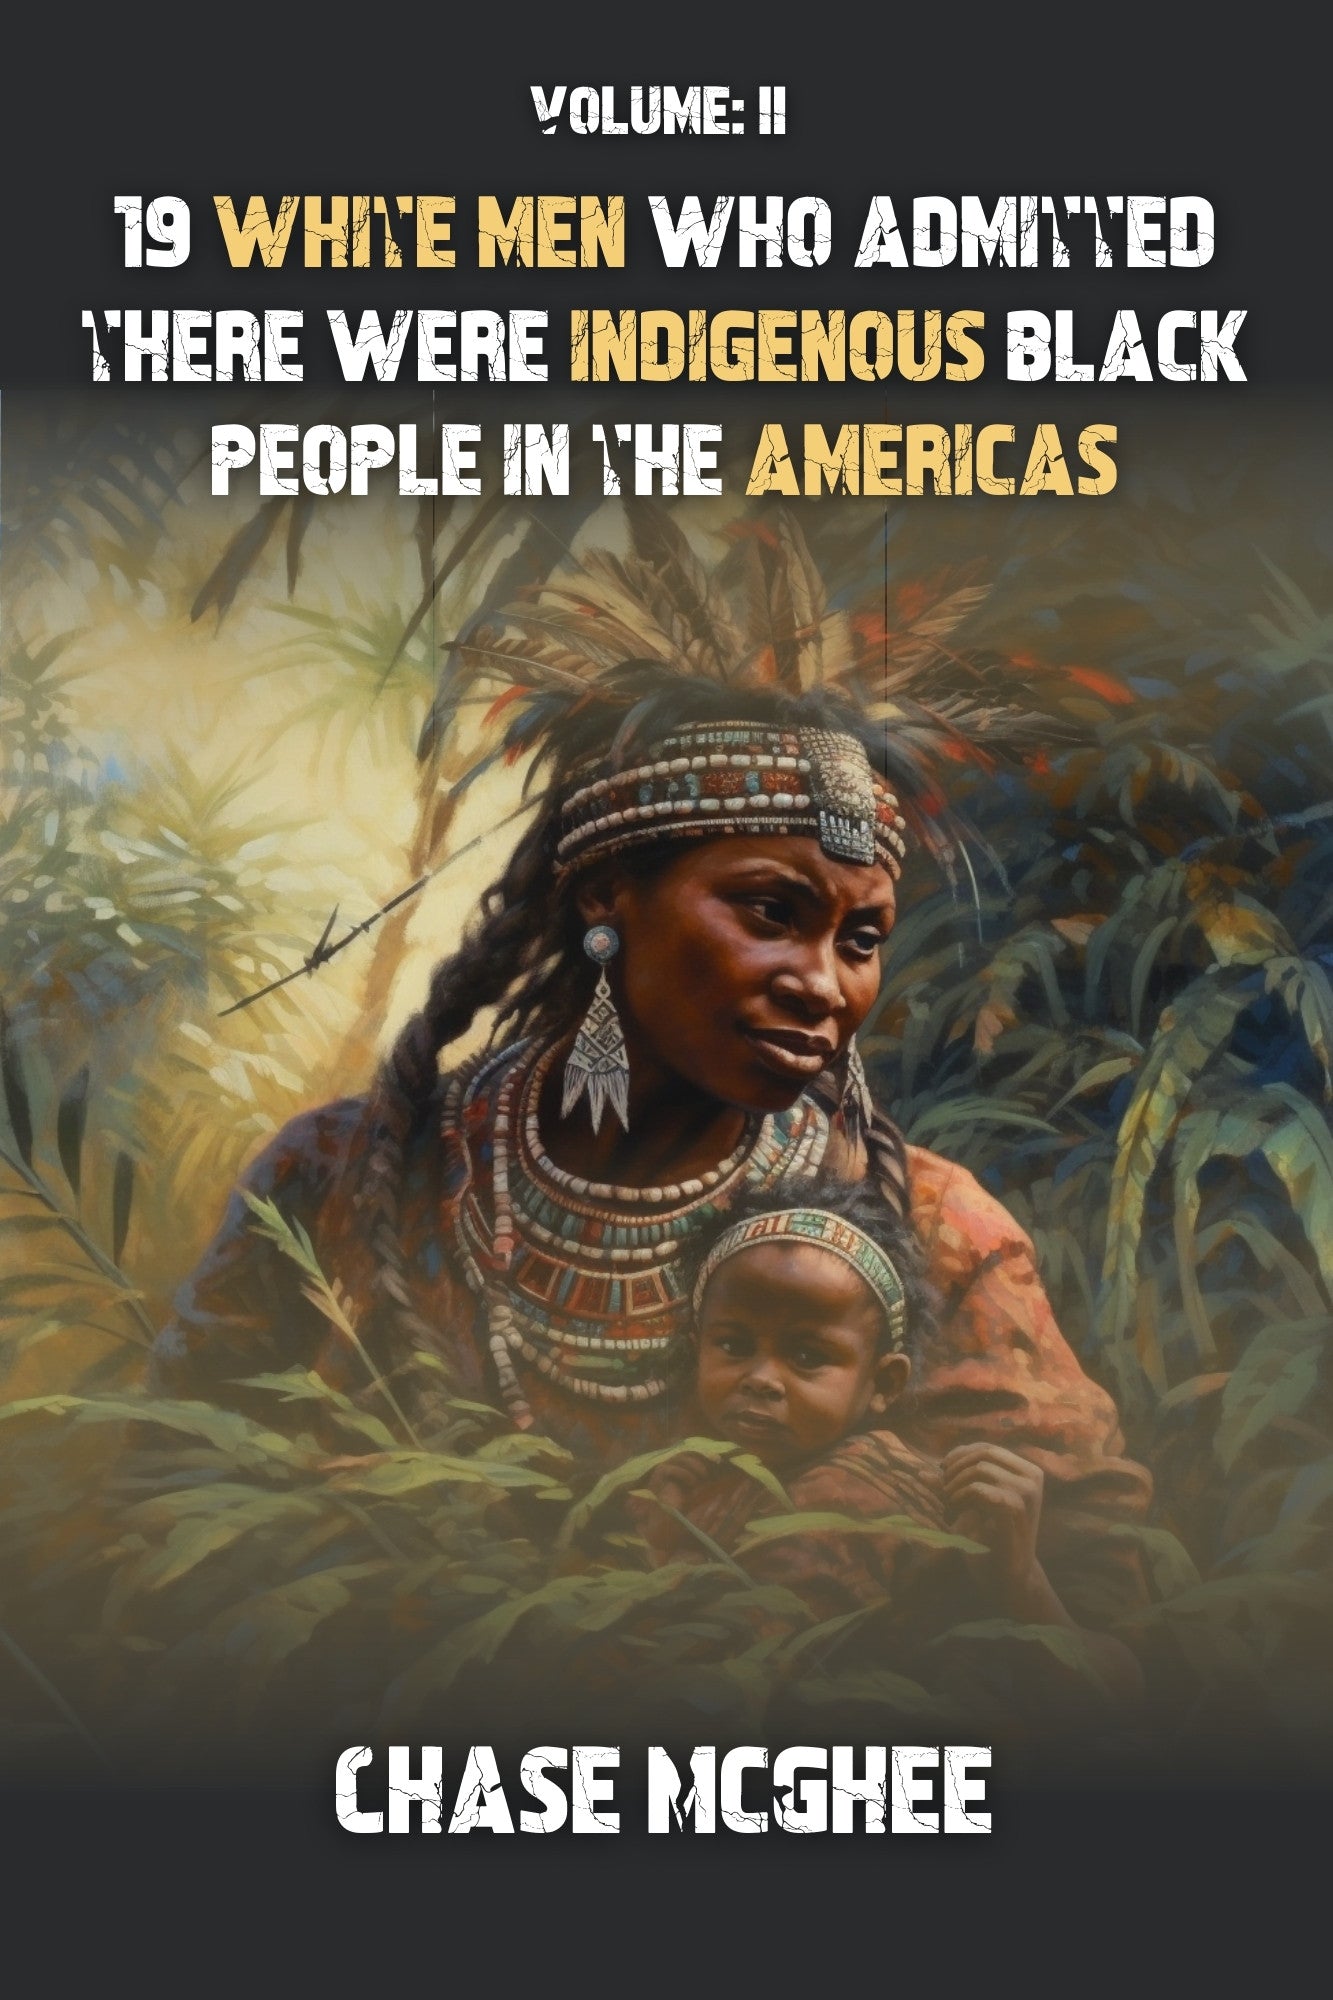 19 White Men who admitted there were Indigenous Black people in the Americas: Volume II